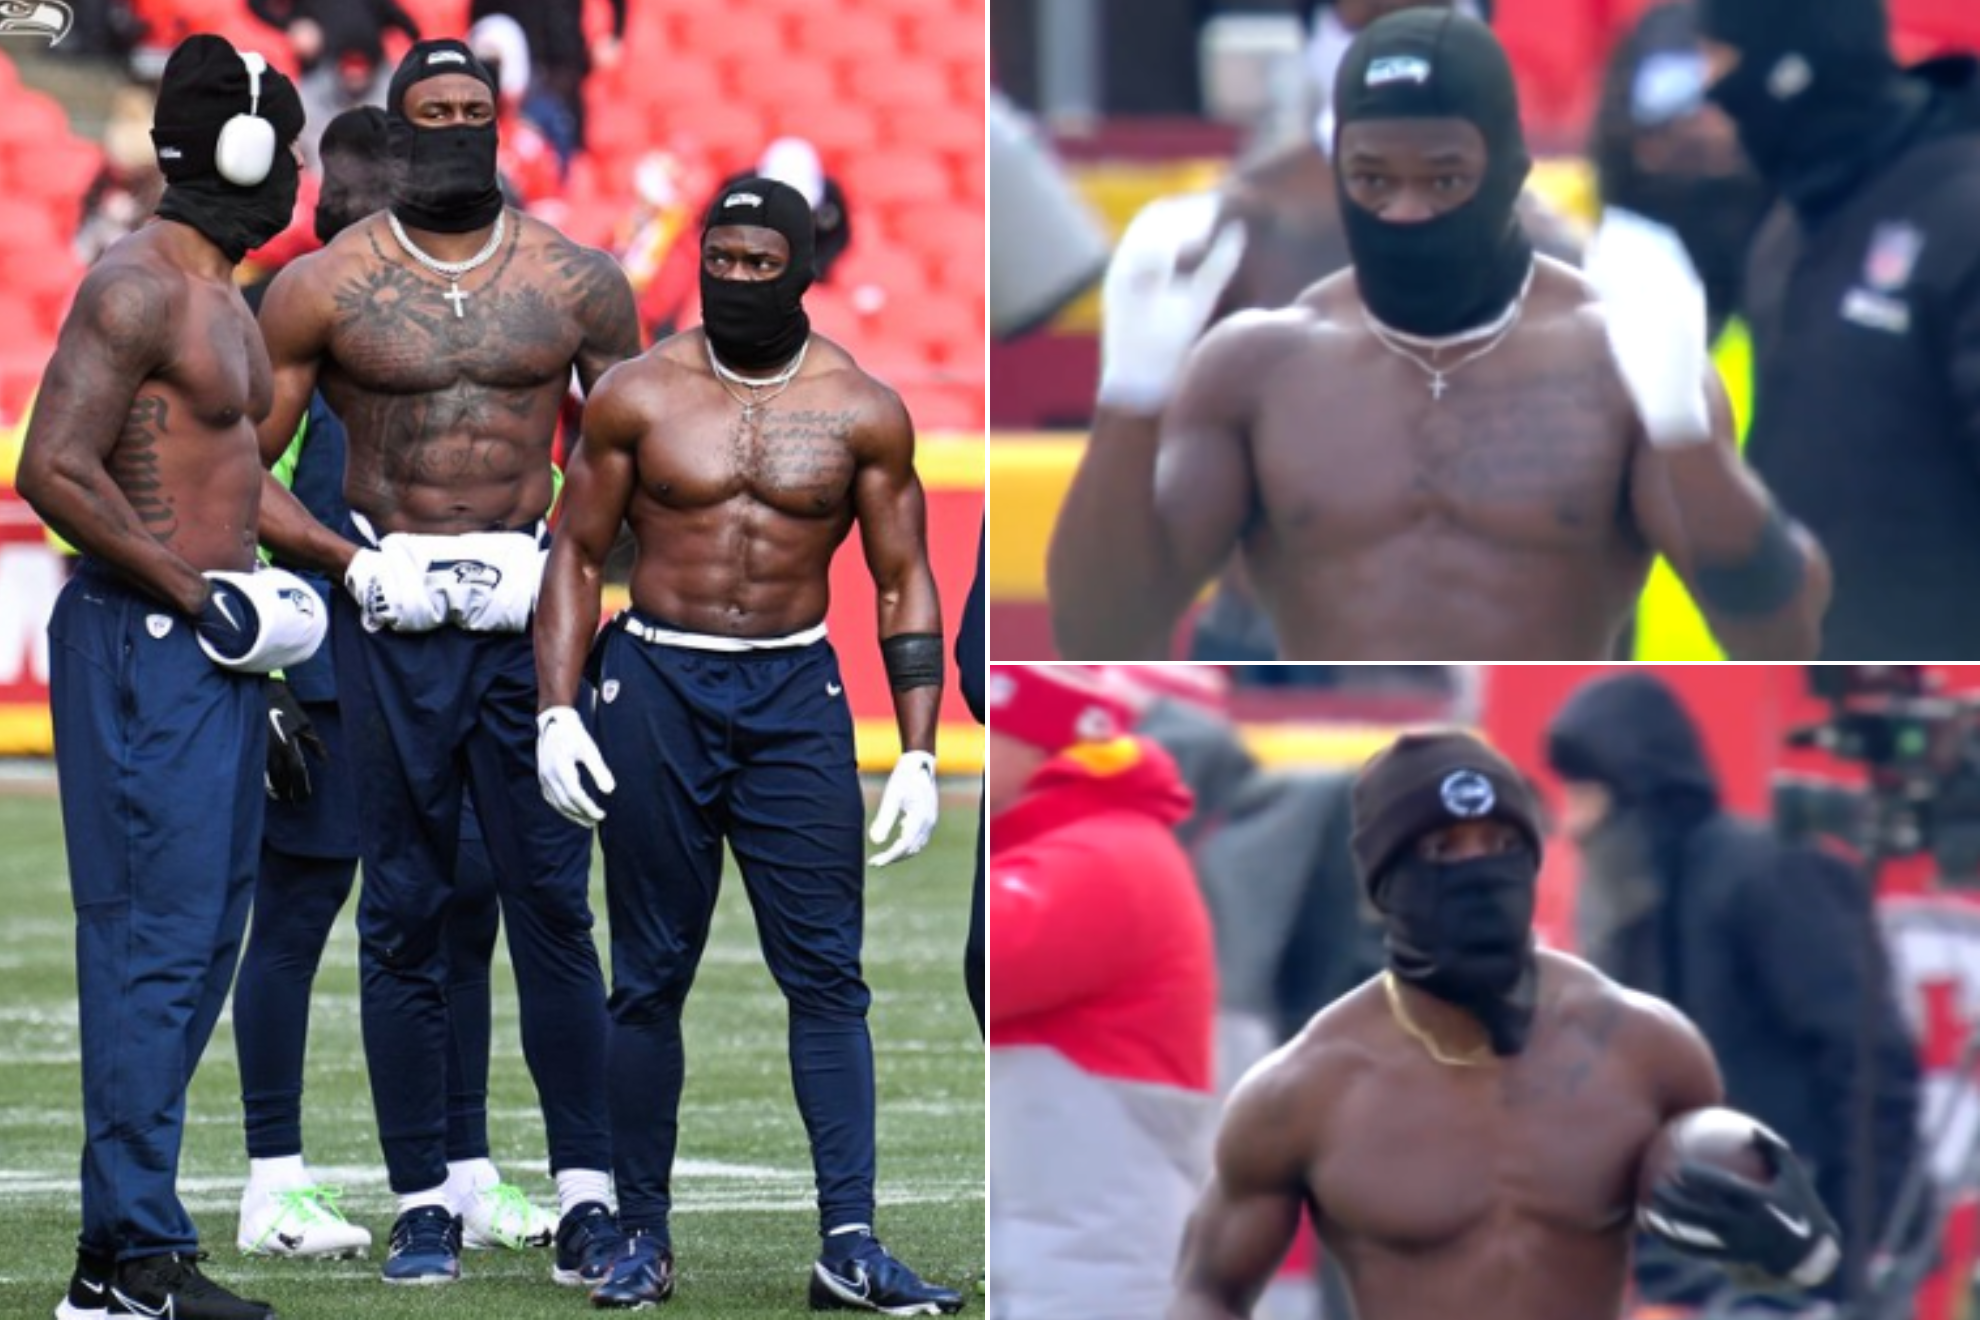 The crazy warm-up that's sweeping the NFL: Seattle Seahawks players go topless... at 10 degrees Fahrenheit!